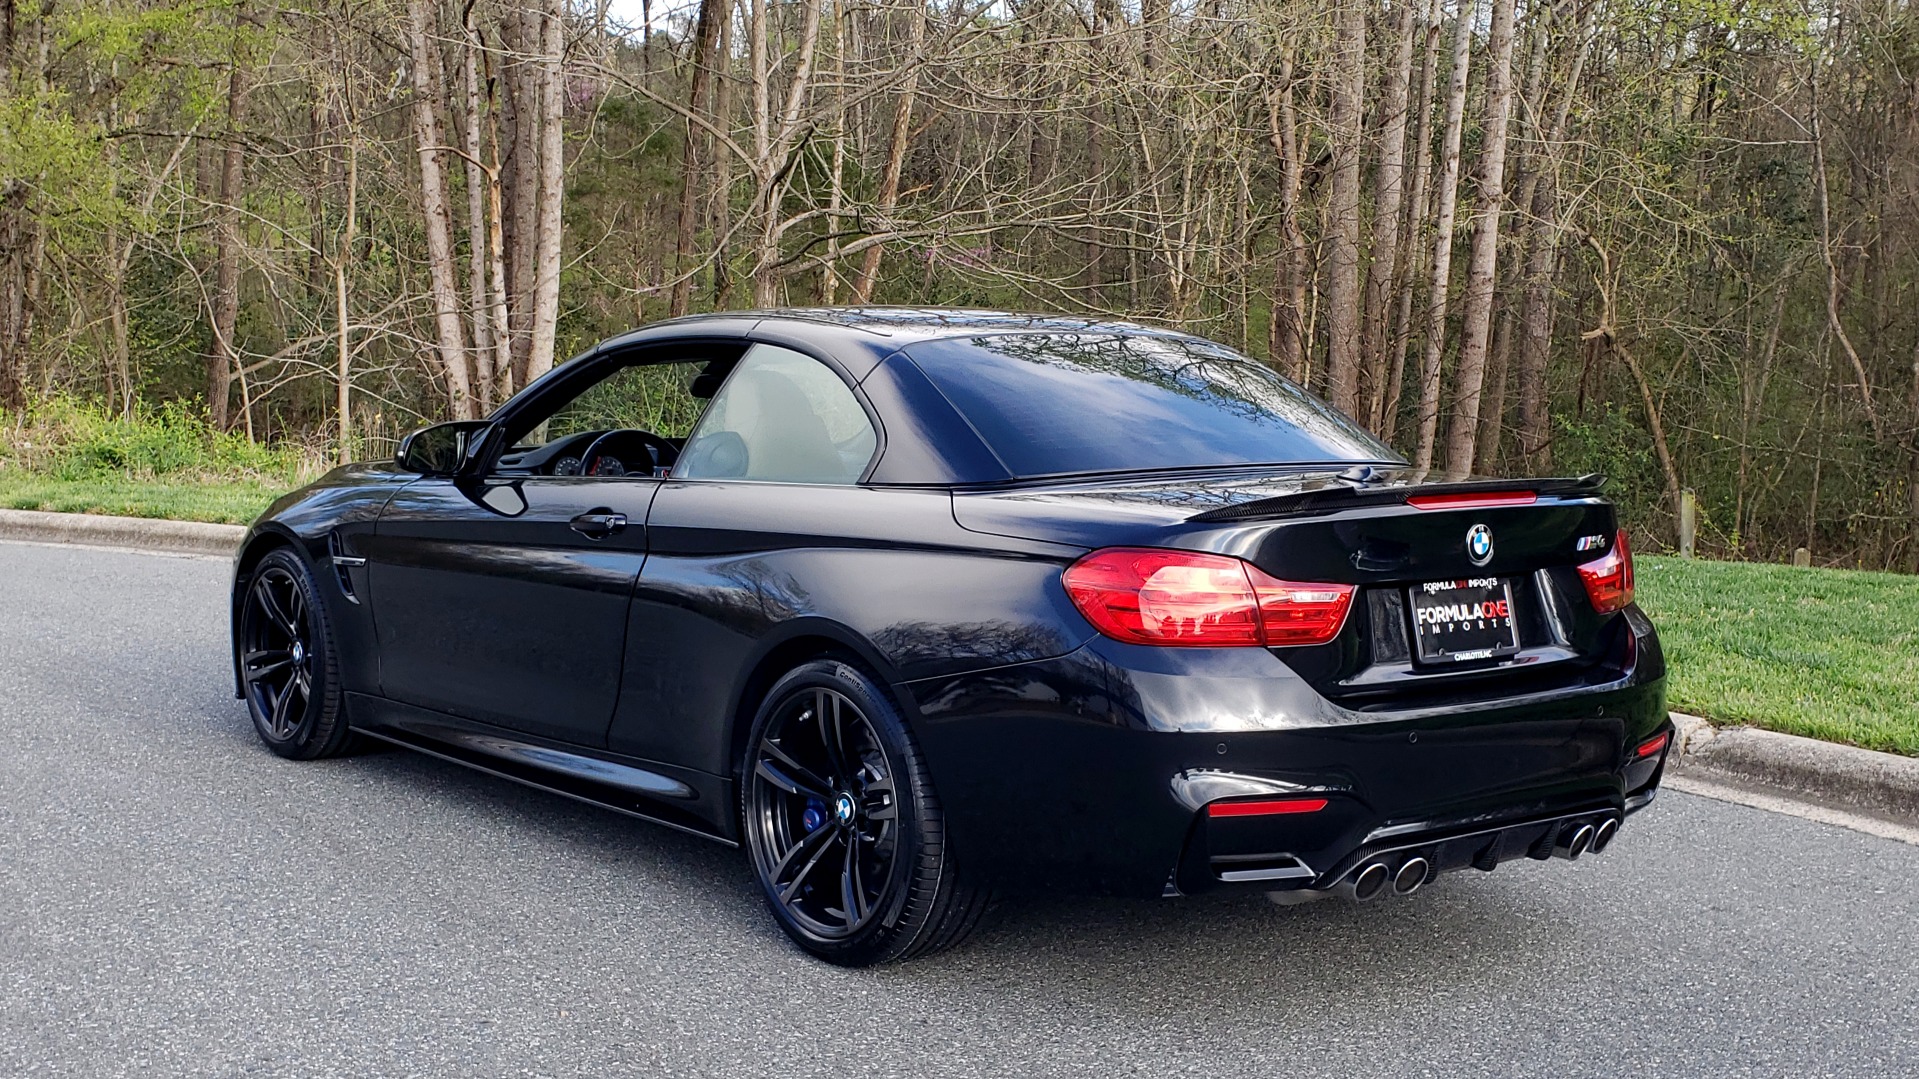 Used 2016 BMW M4 CONVERTIBLE / EXEC PKG / DRVR ASST / M SUSPENSION for sale Sold at Formula Imports in Charlotte NC 28227 5